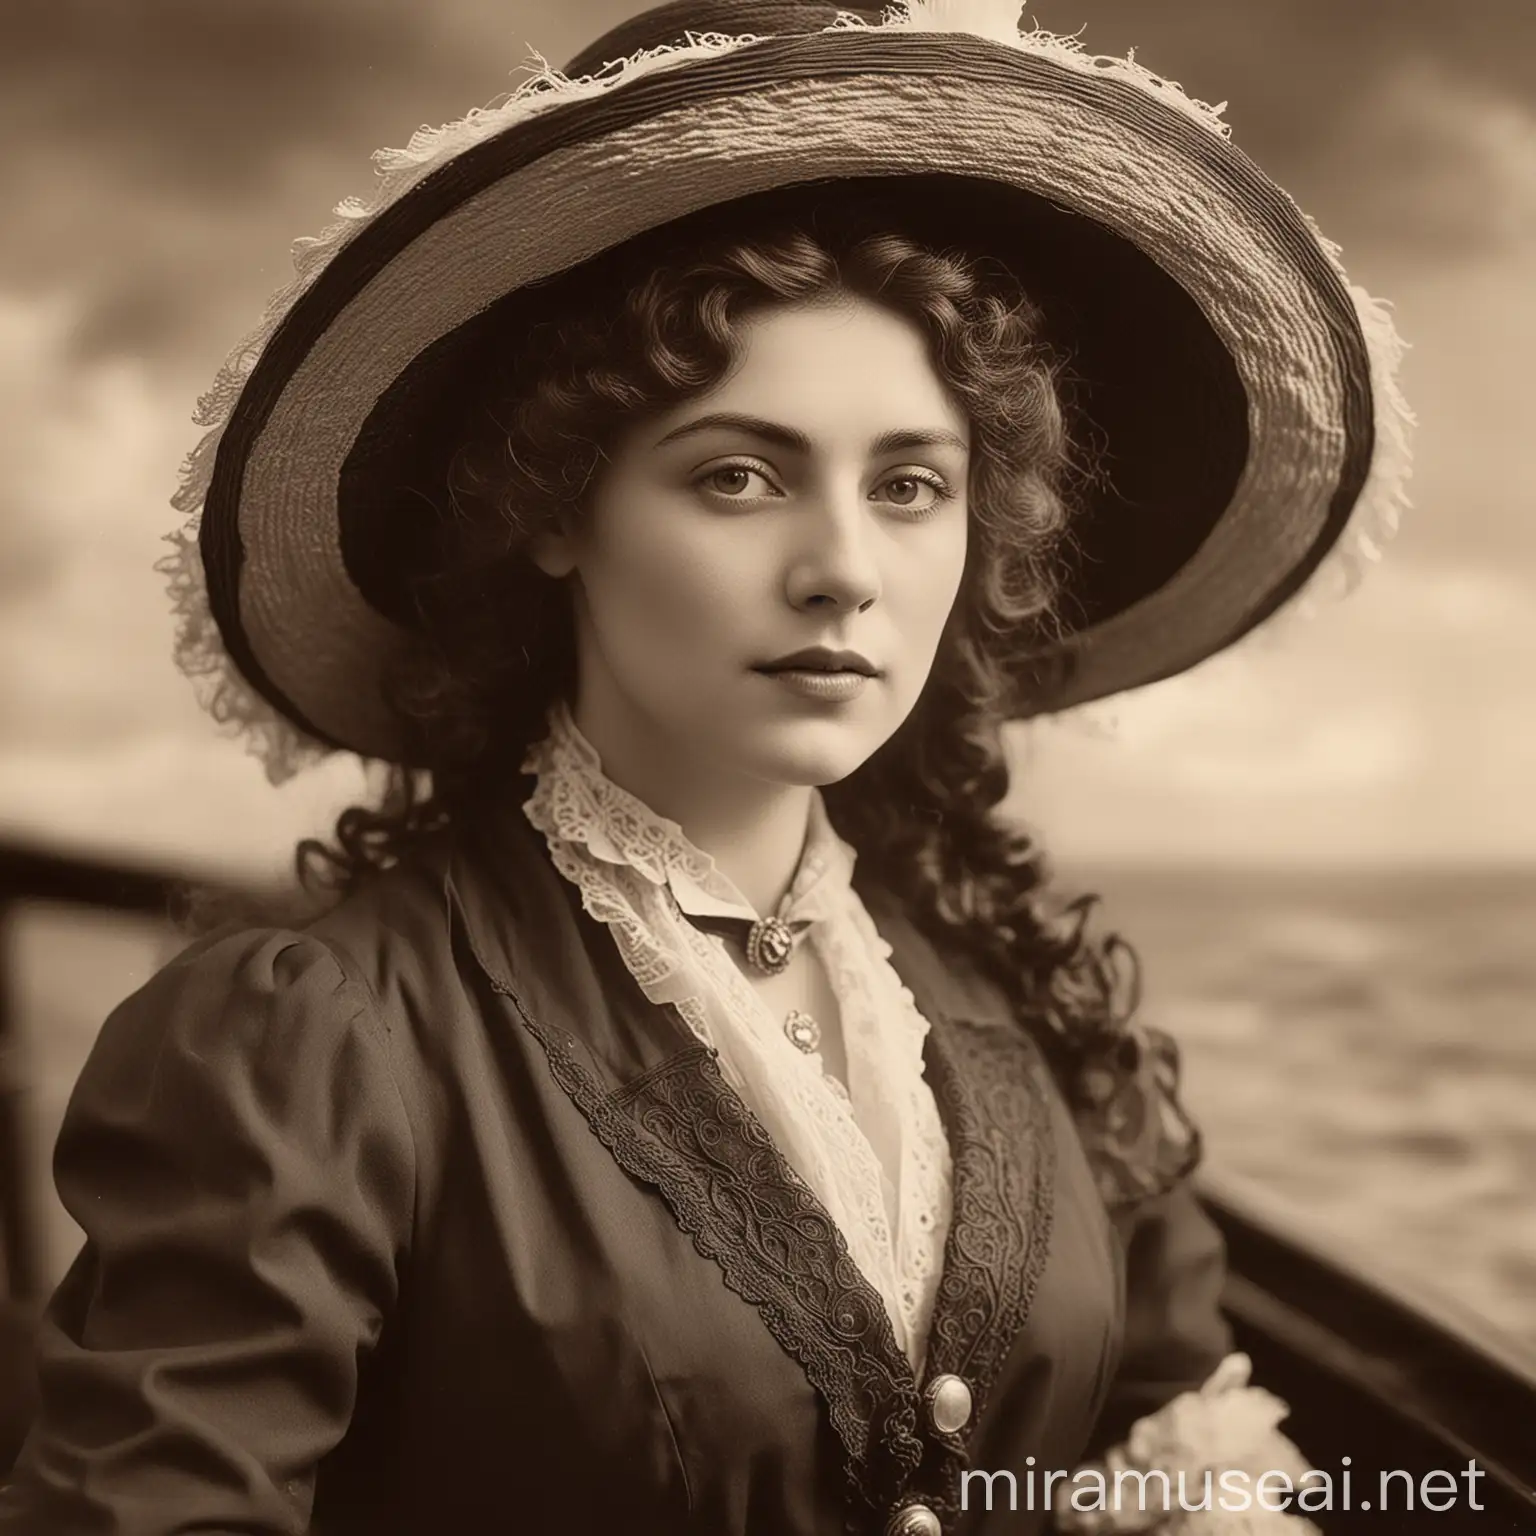 beautiful edwardian woman on the titanic in a large hat, realistic, vintage bw photograph